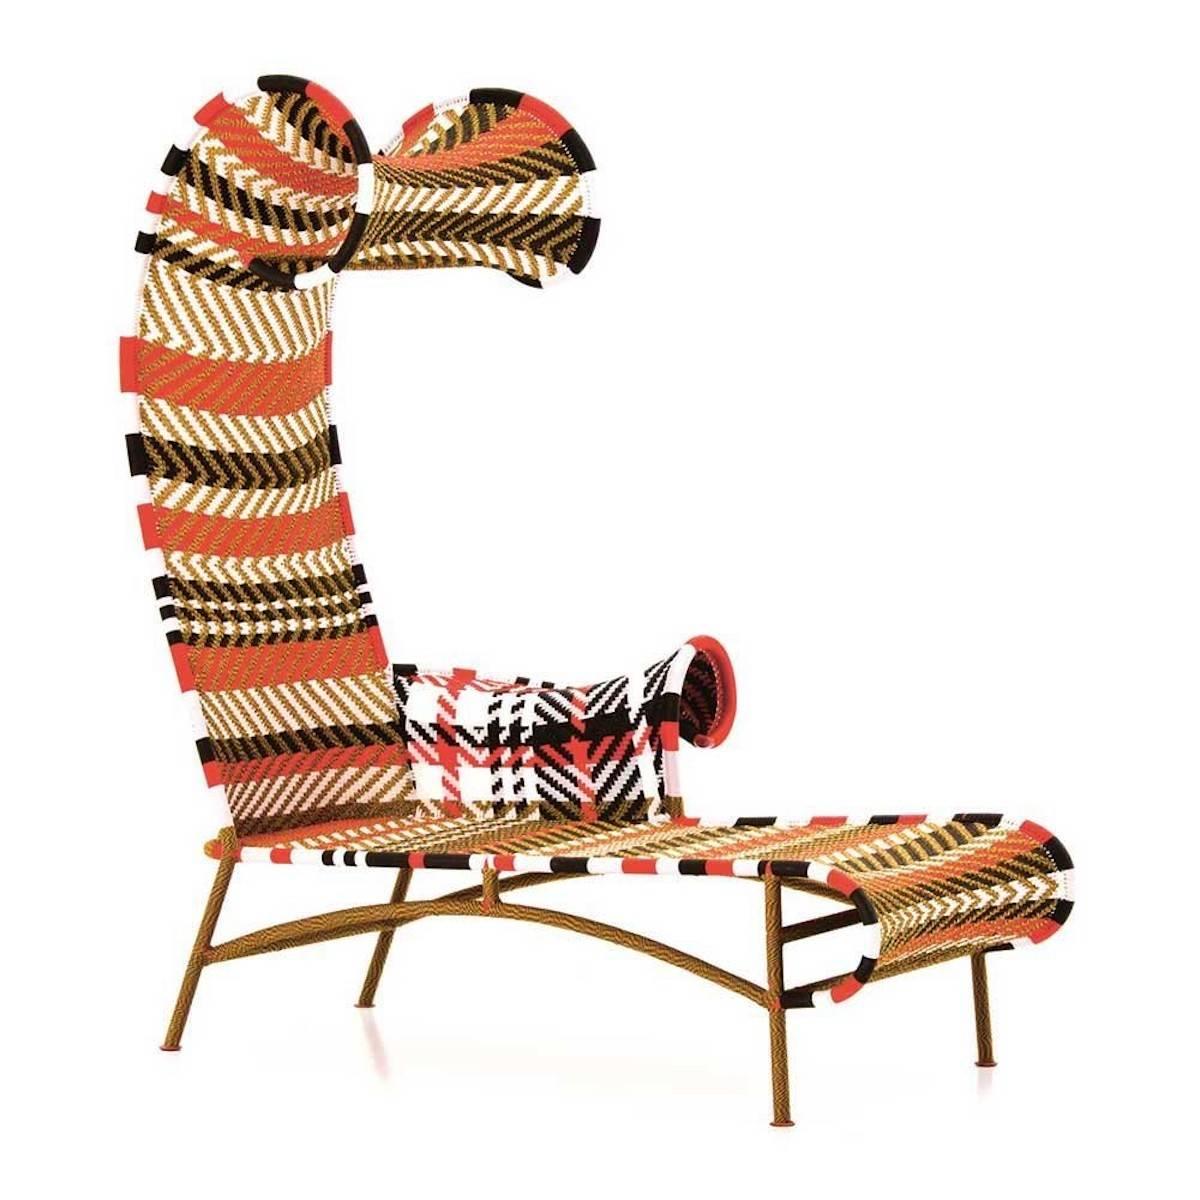 Seating made using woven threads normally used for fishing nets, the designs are all different and original, like their names. Handwoven, they are human in their perfections and flaws.

Painted steel base and colored polyethylene threads